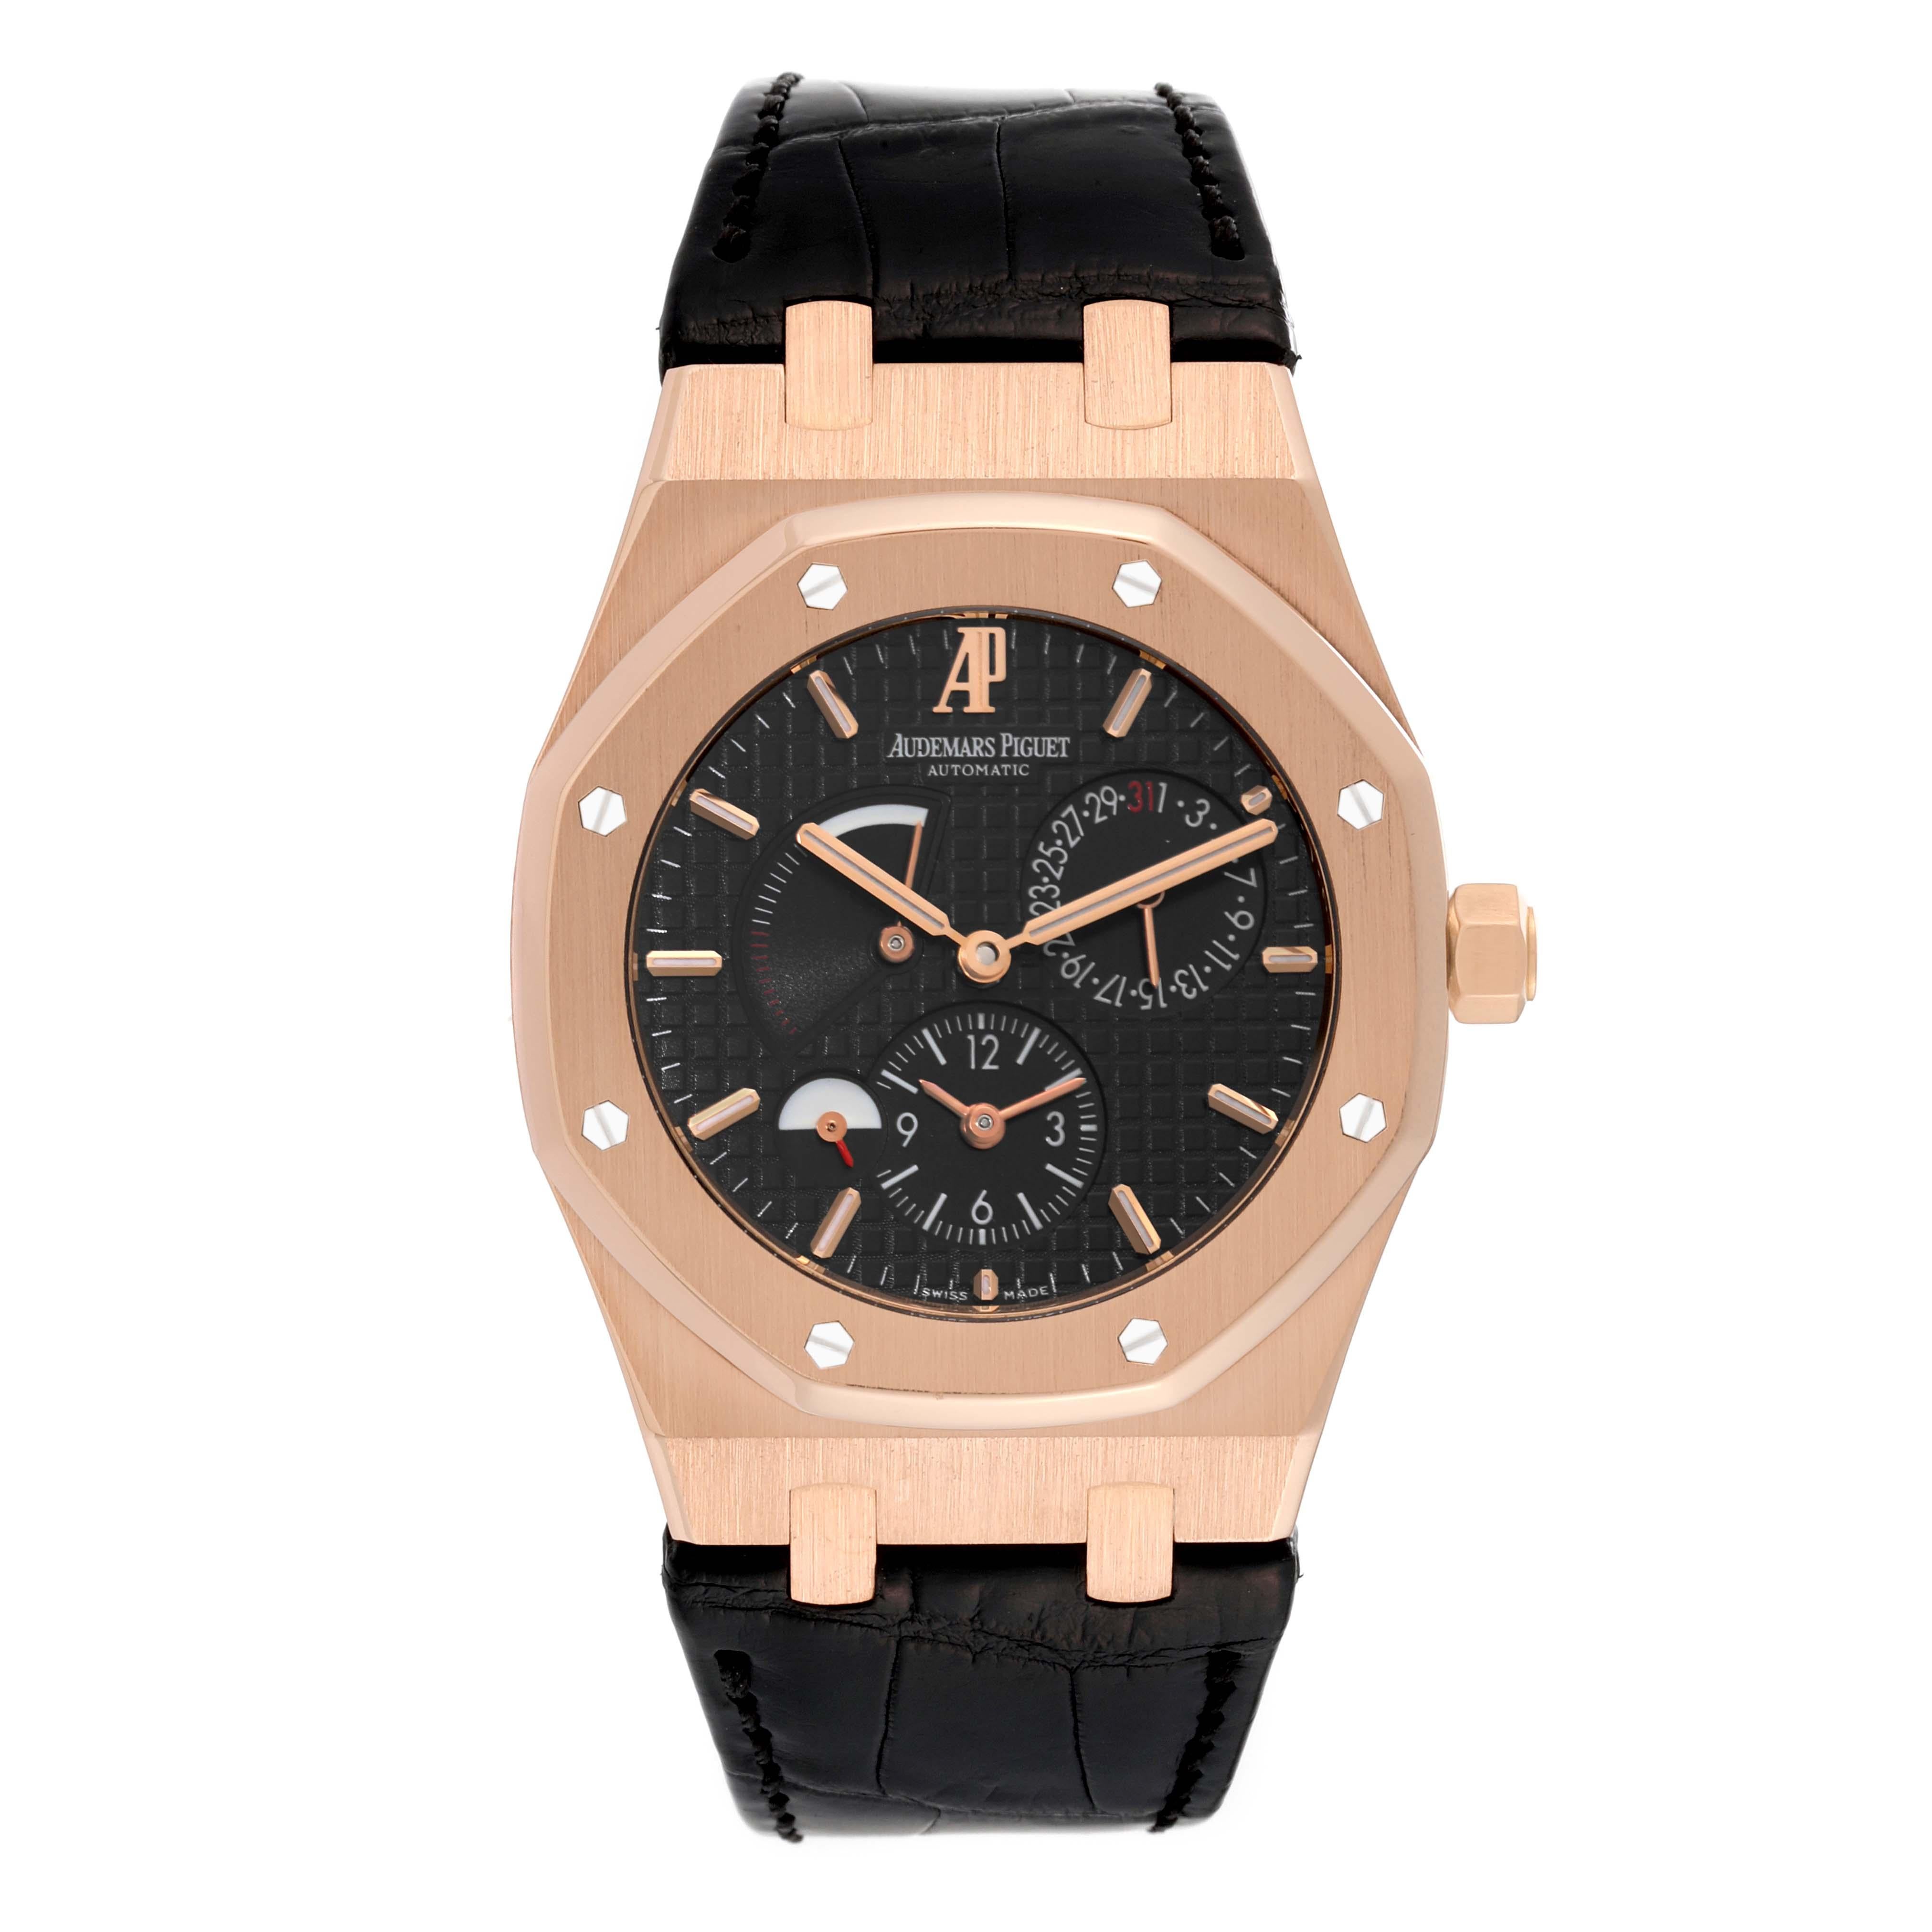 Audemars Piguet Royal Oak Dual Time Rose Gold Mens Watch 26120OR. Automatic self-winding chronograph movement. 18k rose gold octagonal case 39 mm in diameter. Solid case back. 18k rose gold bezel punctuated with 8 signature screws. Scratch resistant